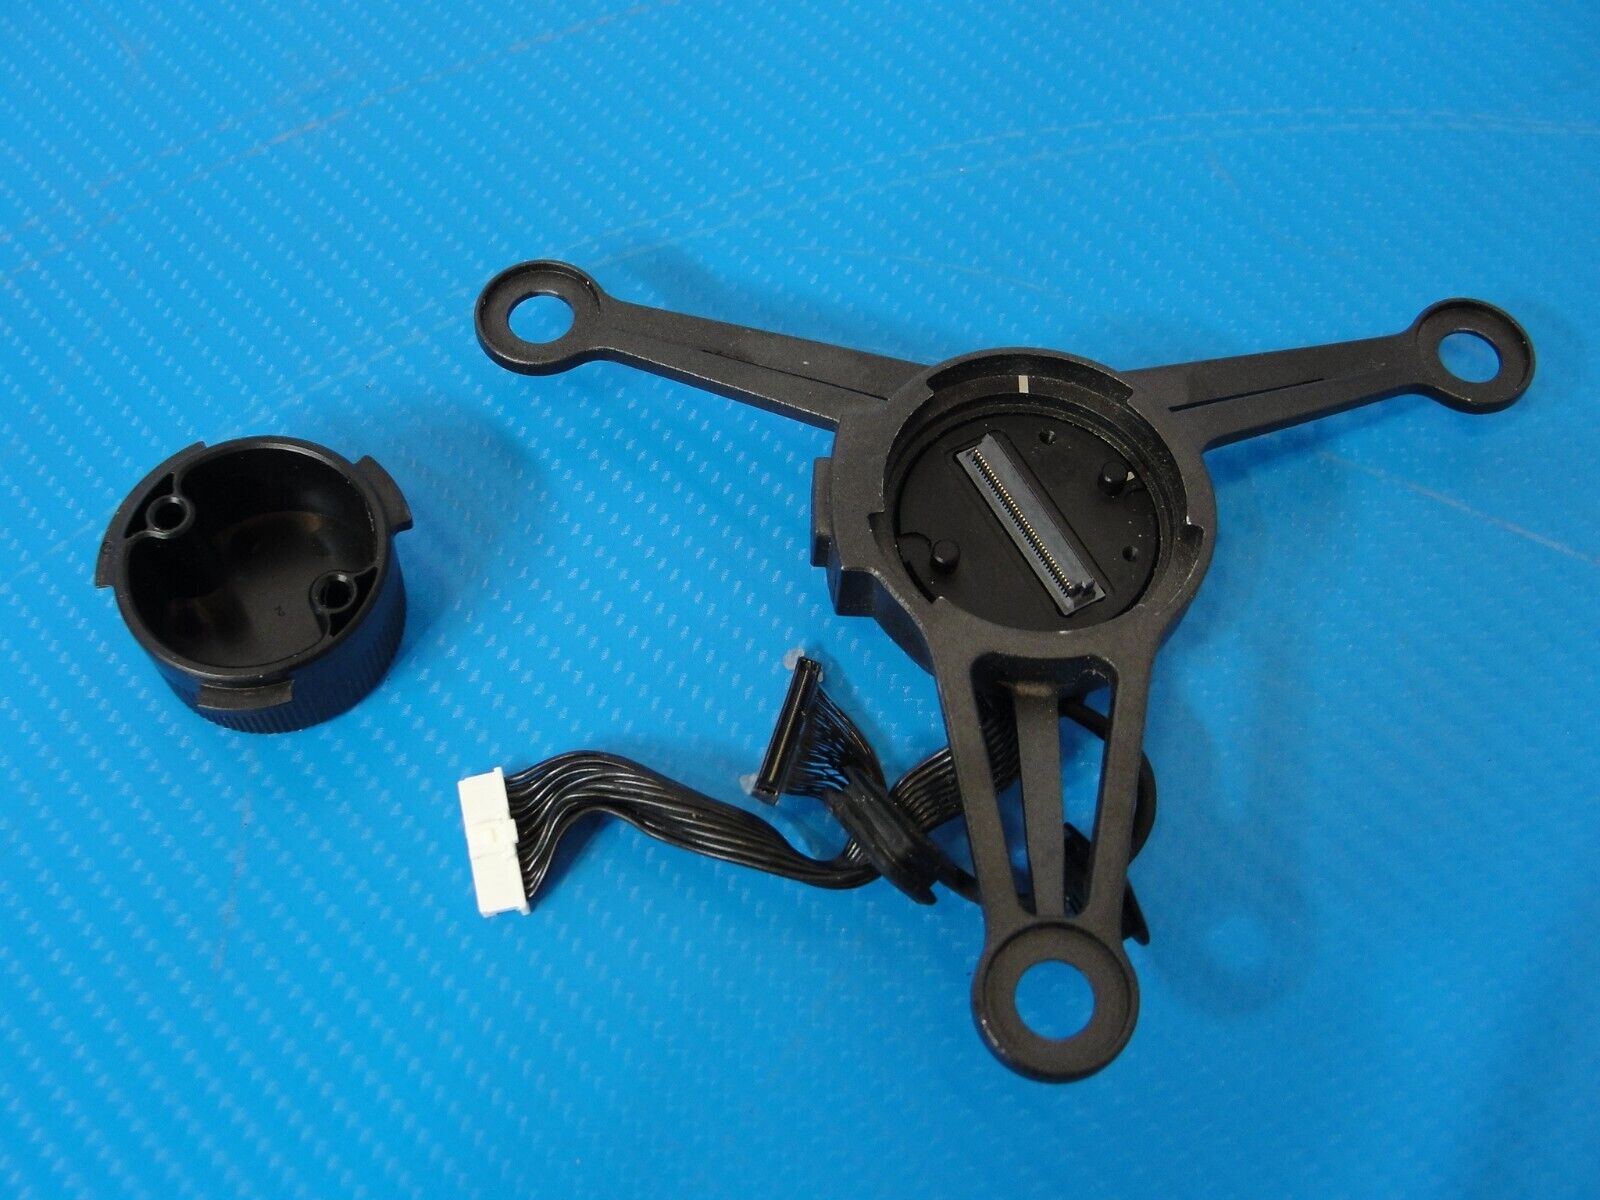 DJI Inspire 2 Drone Vibration Absorbing Board Replacement (Part 23)